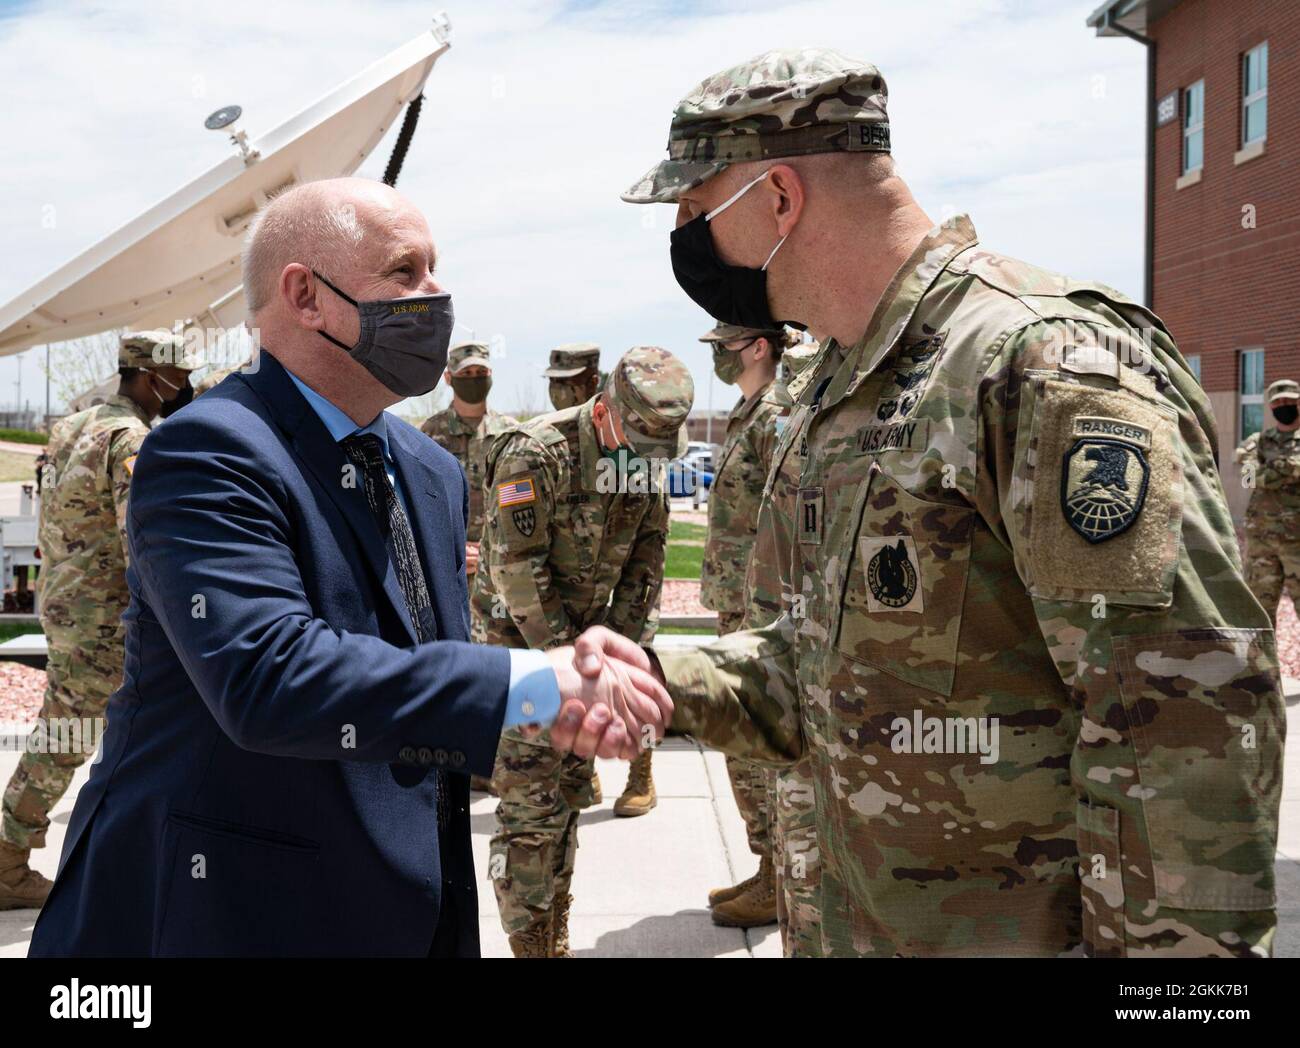 Acting Secretary of the Army Hon. John E. Whitley presents a challenge coin to  Capt. Gideon Bernthal for his hard work in planning the Secretary's visit to U.S. Army Space and Missile Defense Command units at Fort Carson, Colo., May 13, 2021. Stock Photo